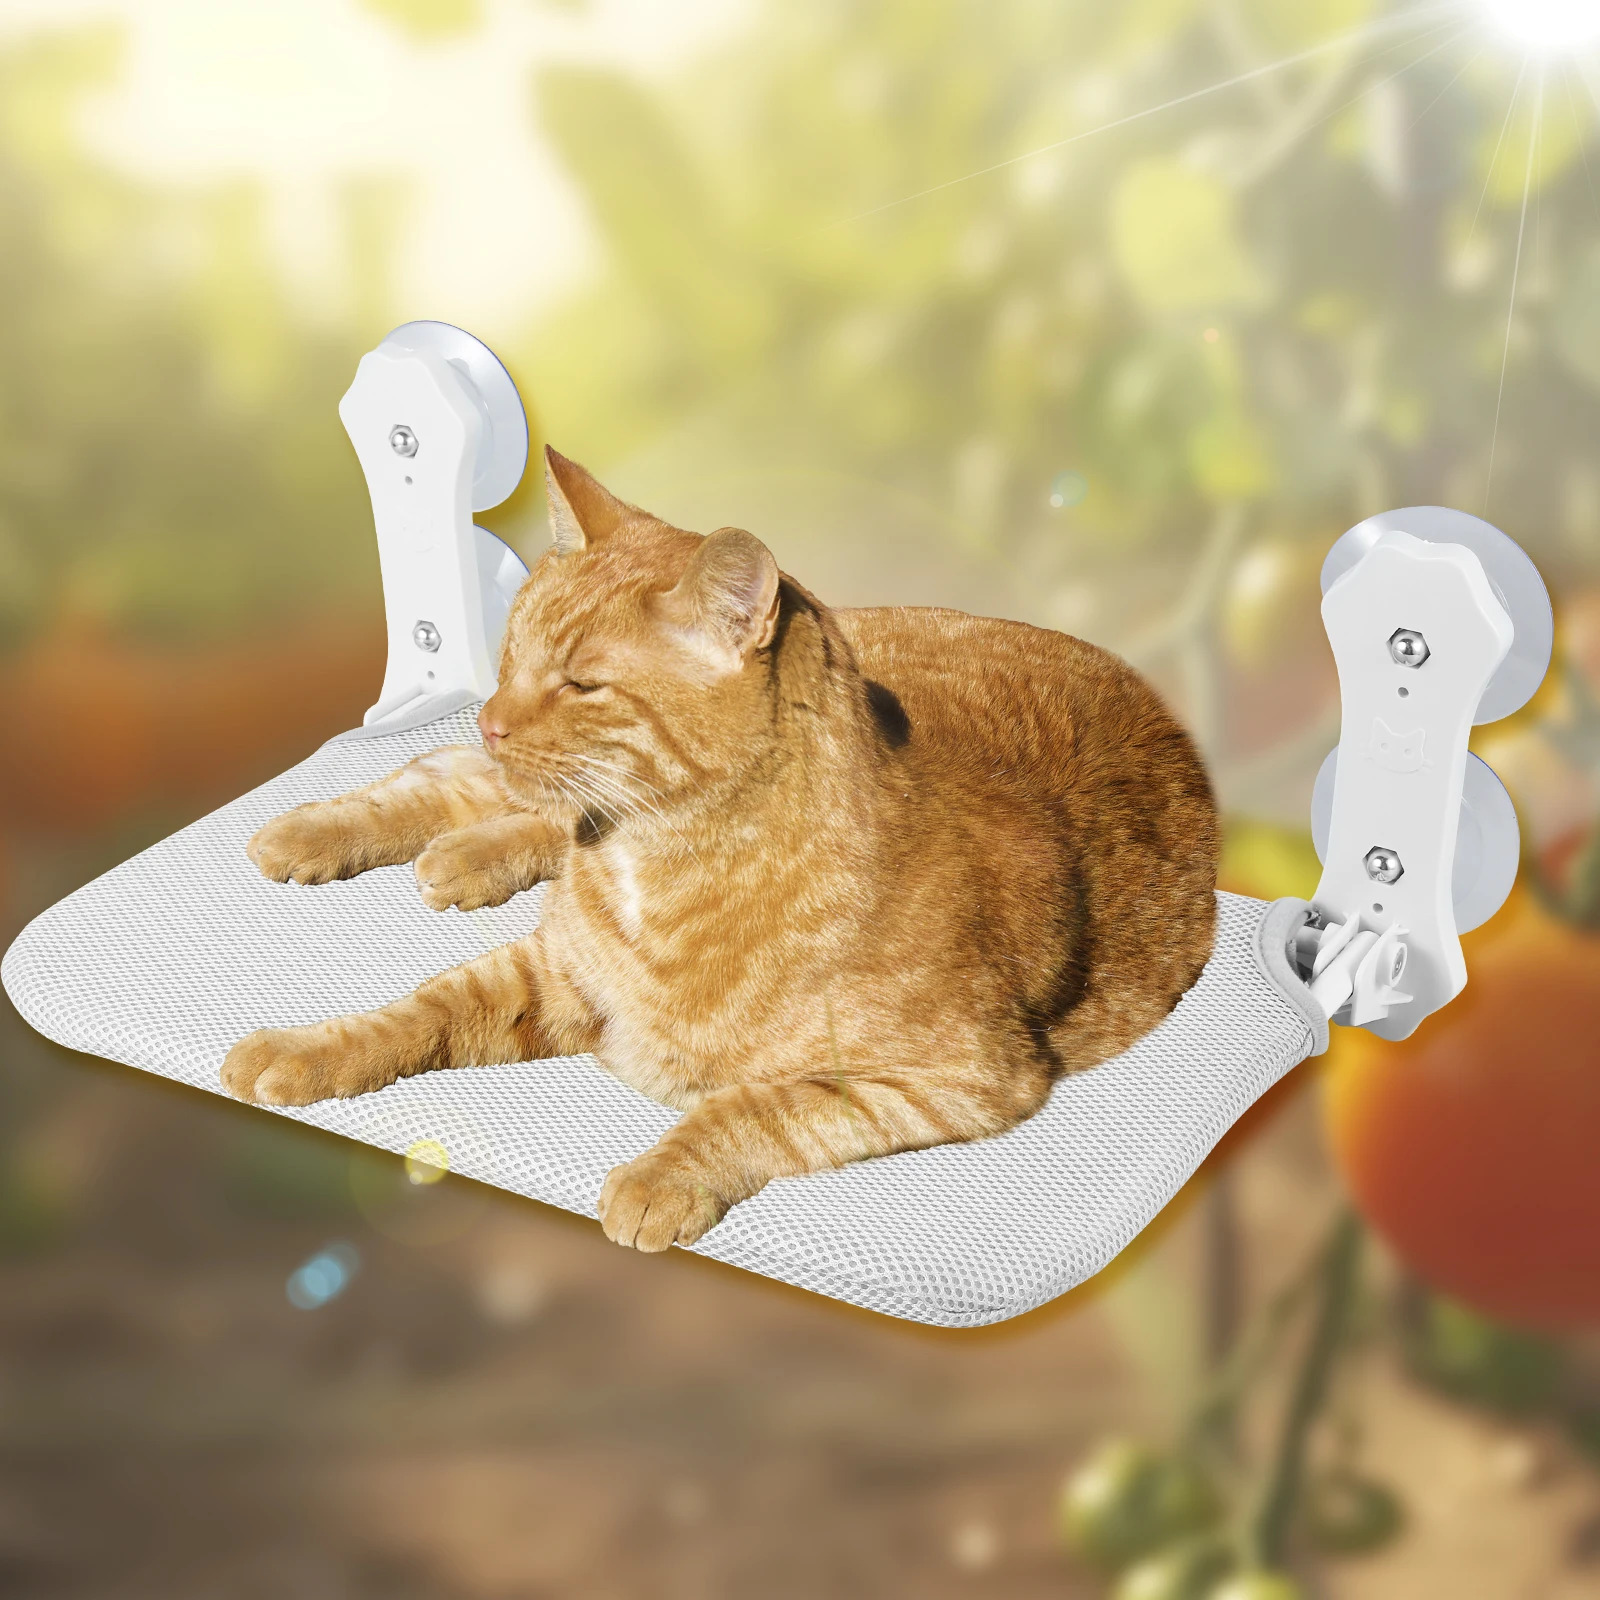 

Cat Window Perch Foldable Cat Window Hammock with Detachable Pad 12.5-15kg Weight Capacity Cat Window Bed with Strong Suction